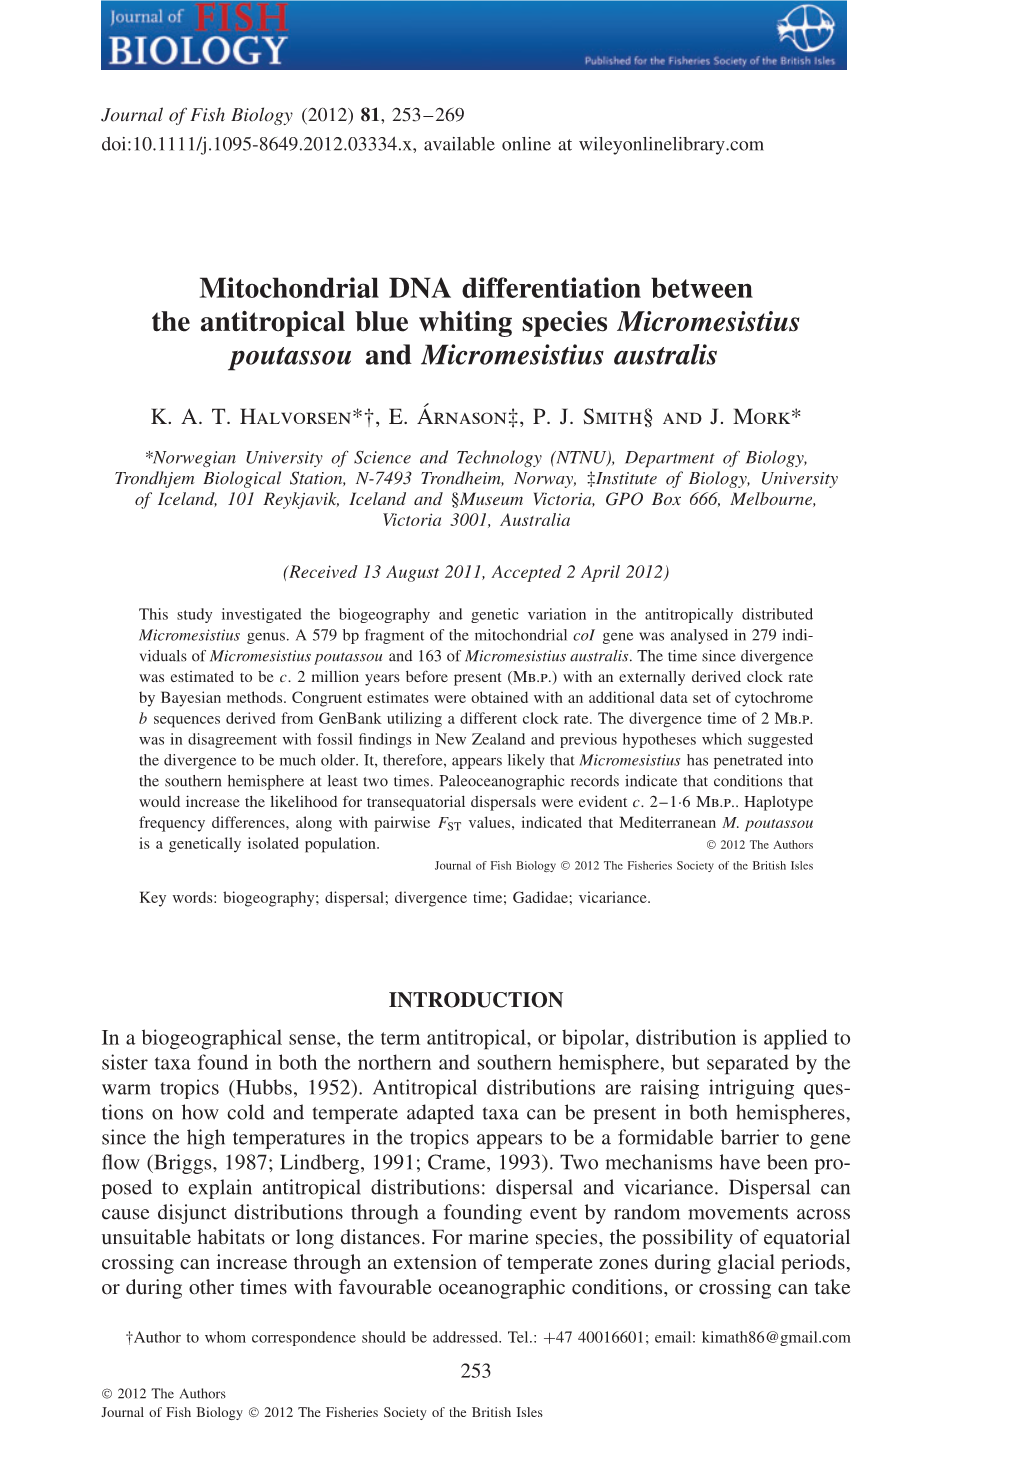 Mitochondrial DNA Differentiation Between the Antitropical Blue Whiting Species Micromesistius Poutassou and Micromesistius Australis